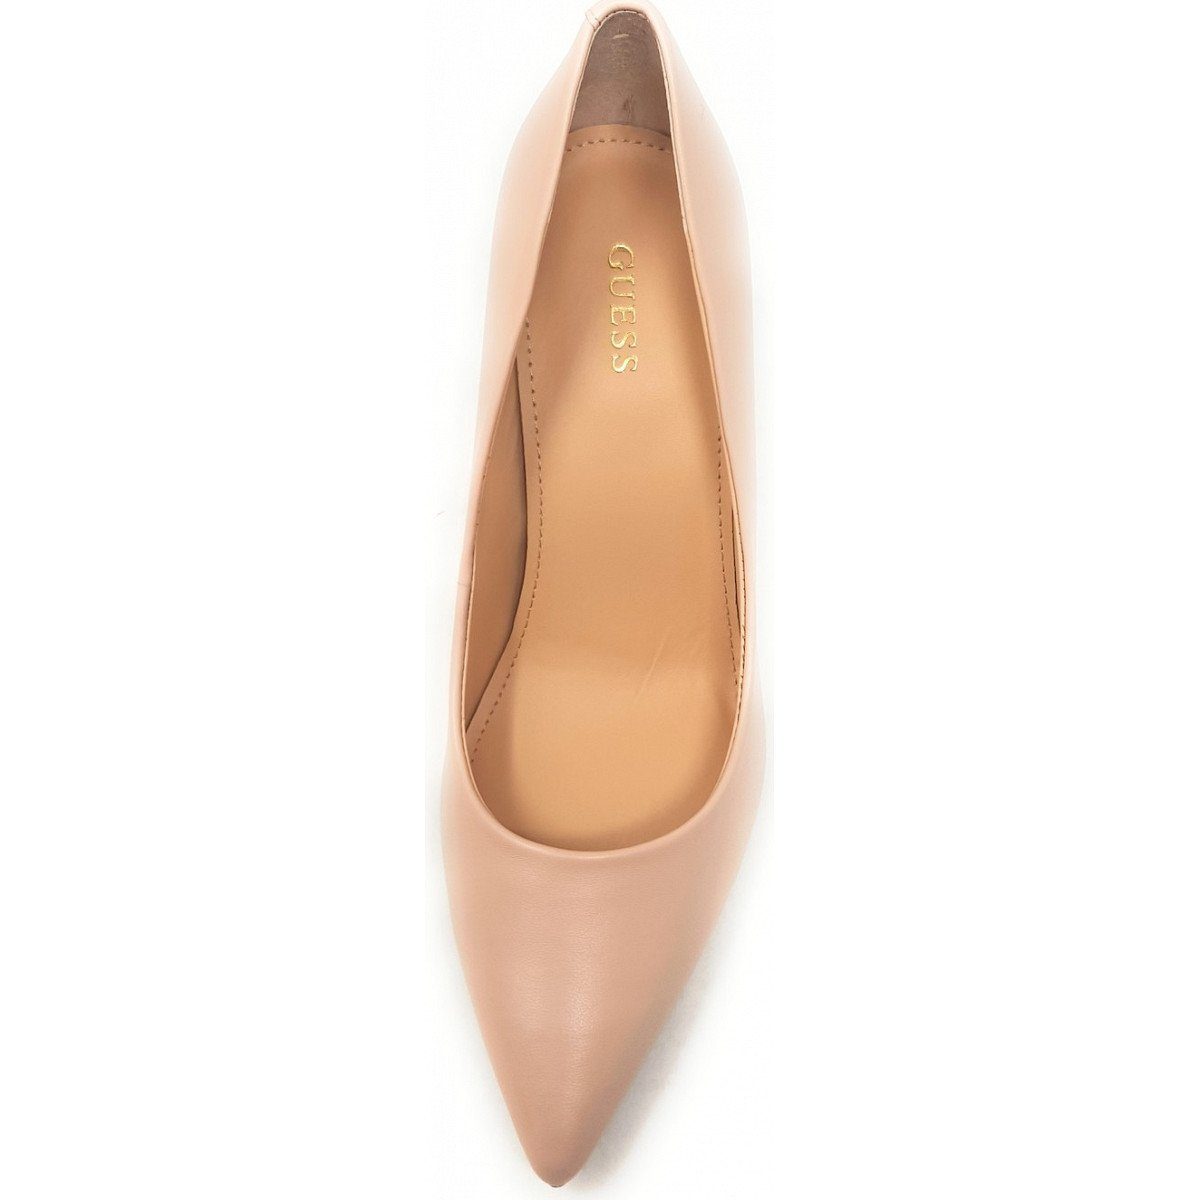 Guess Pumps Pialy